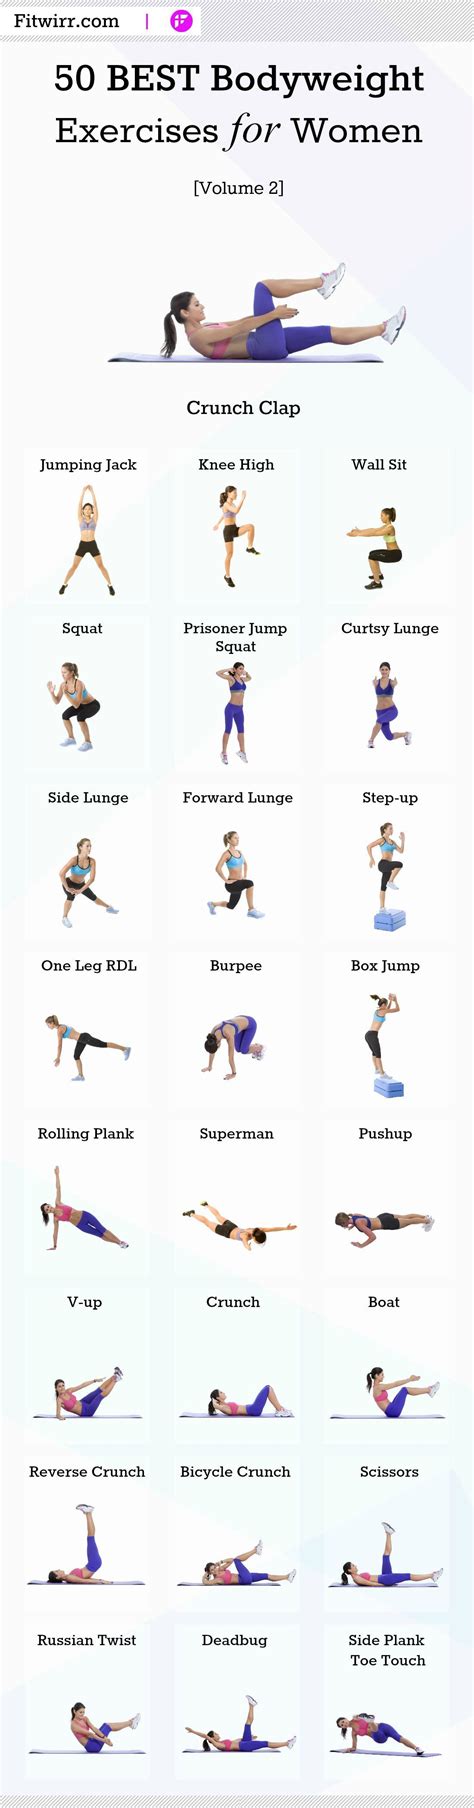 50 best bodyweight exercises you can do anywhere to get fit gym membership exercises and gym